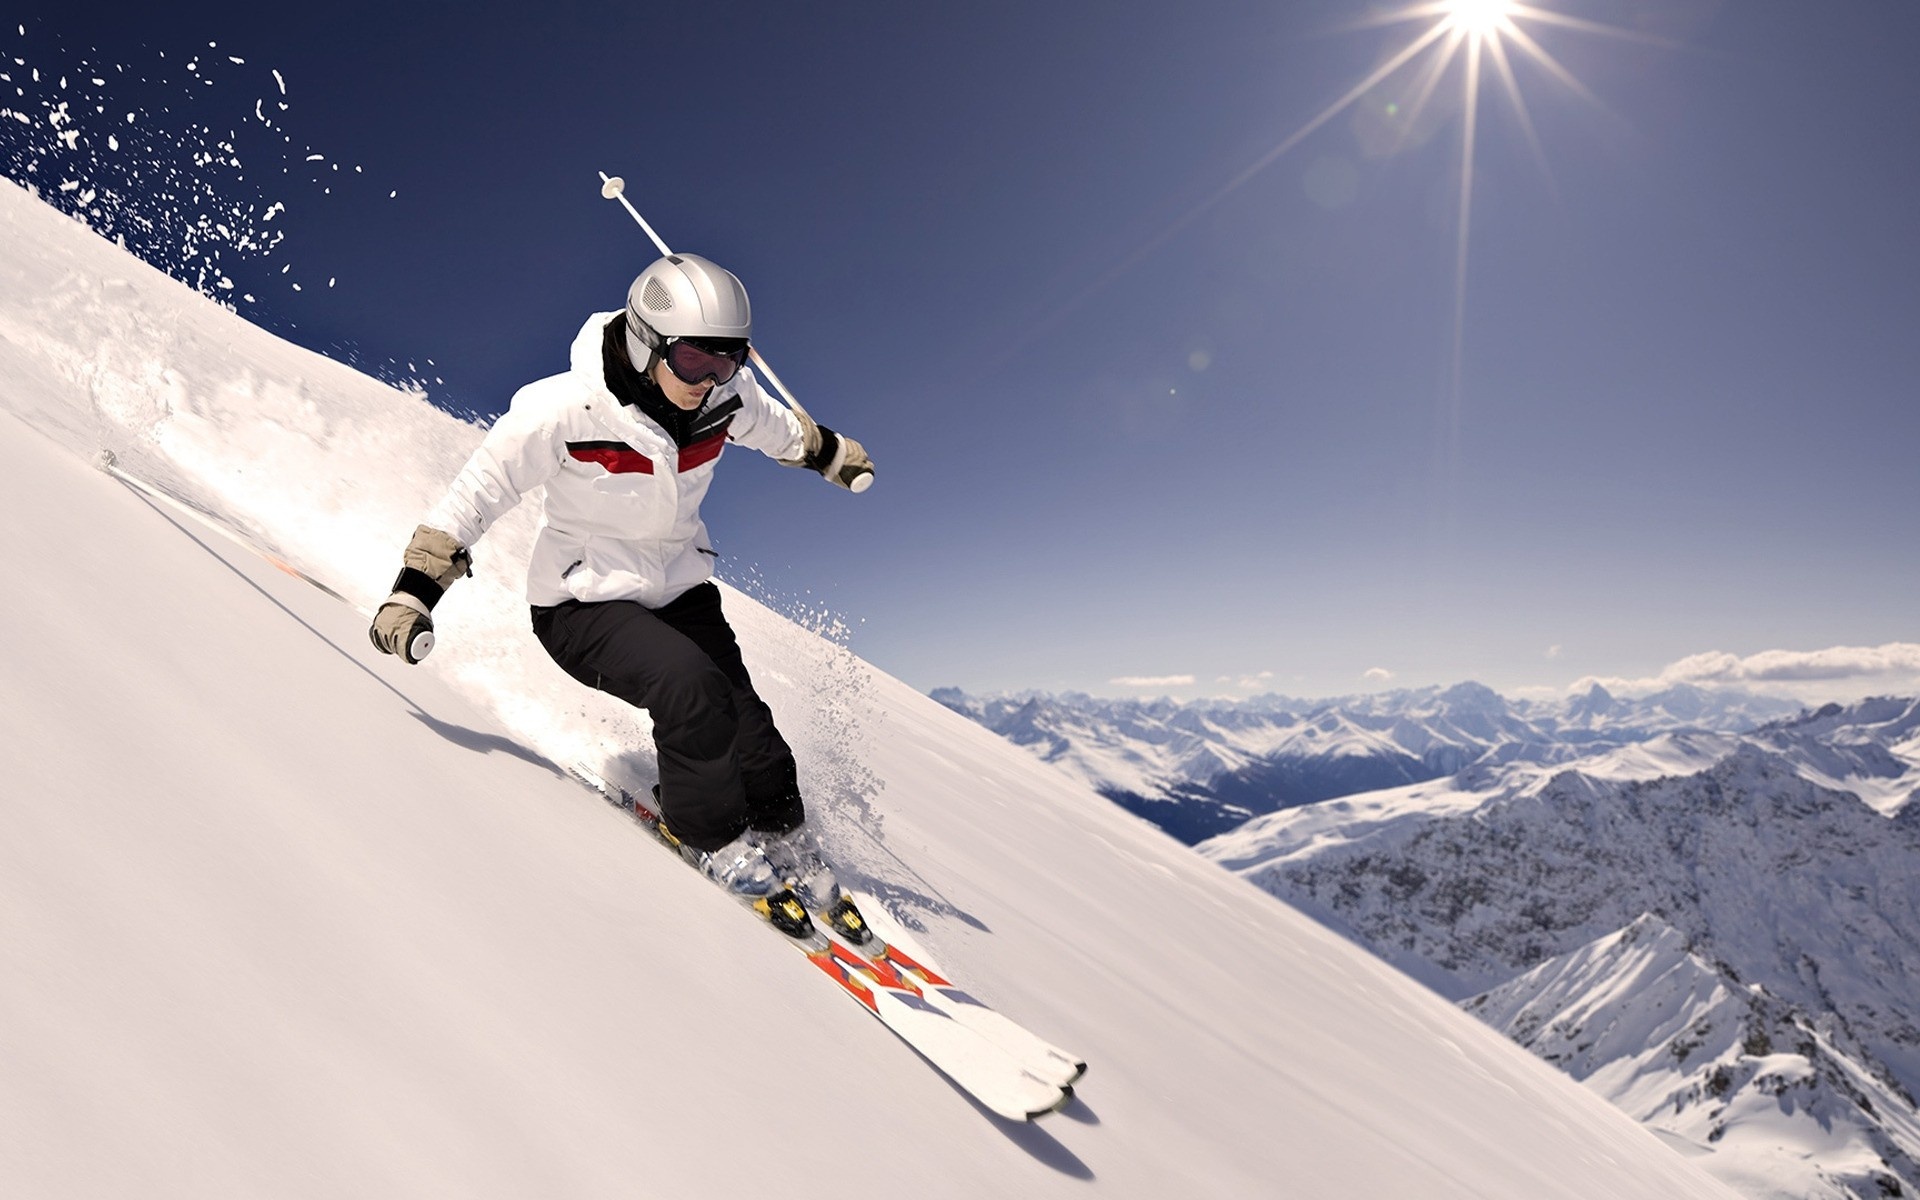 Skiing: Discipline, involving downhill between poles or gates, Cyclic winter sports. 1920x1200 HD Background.